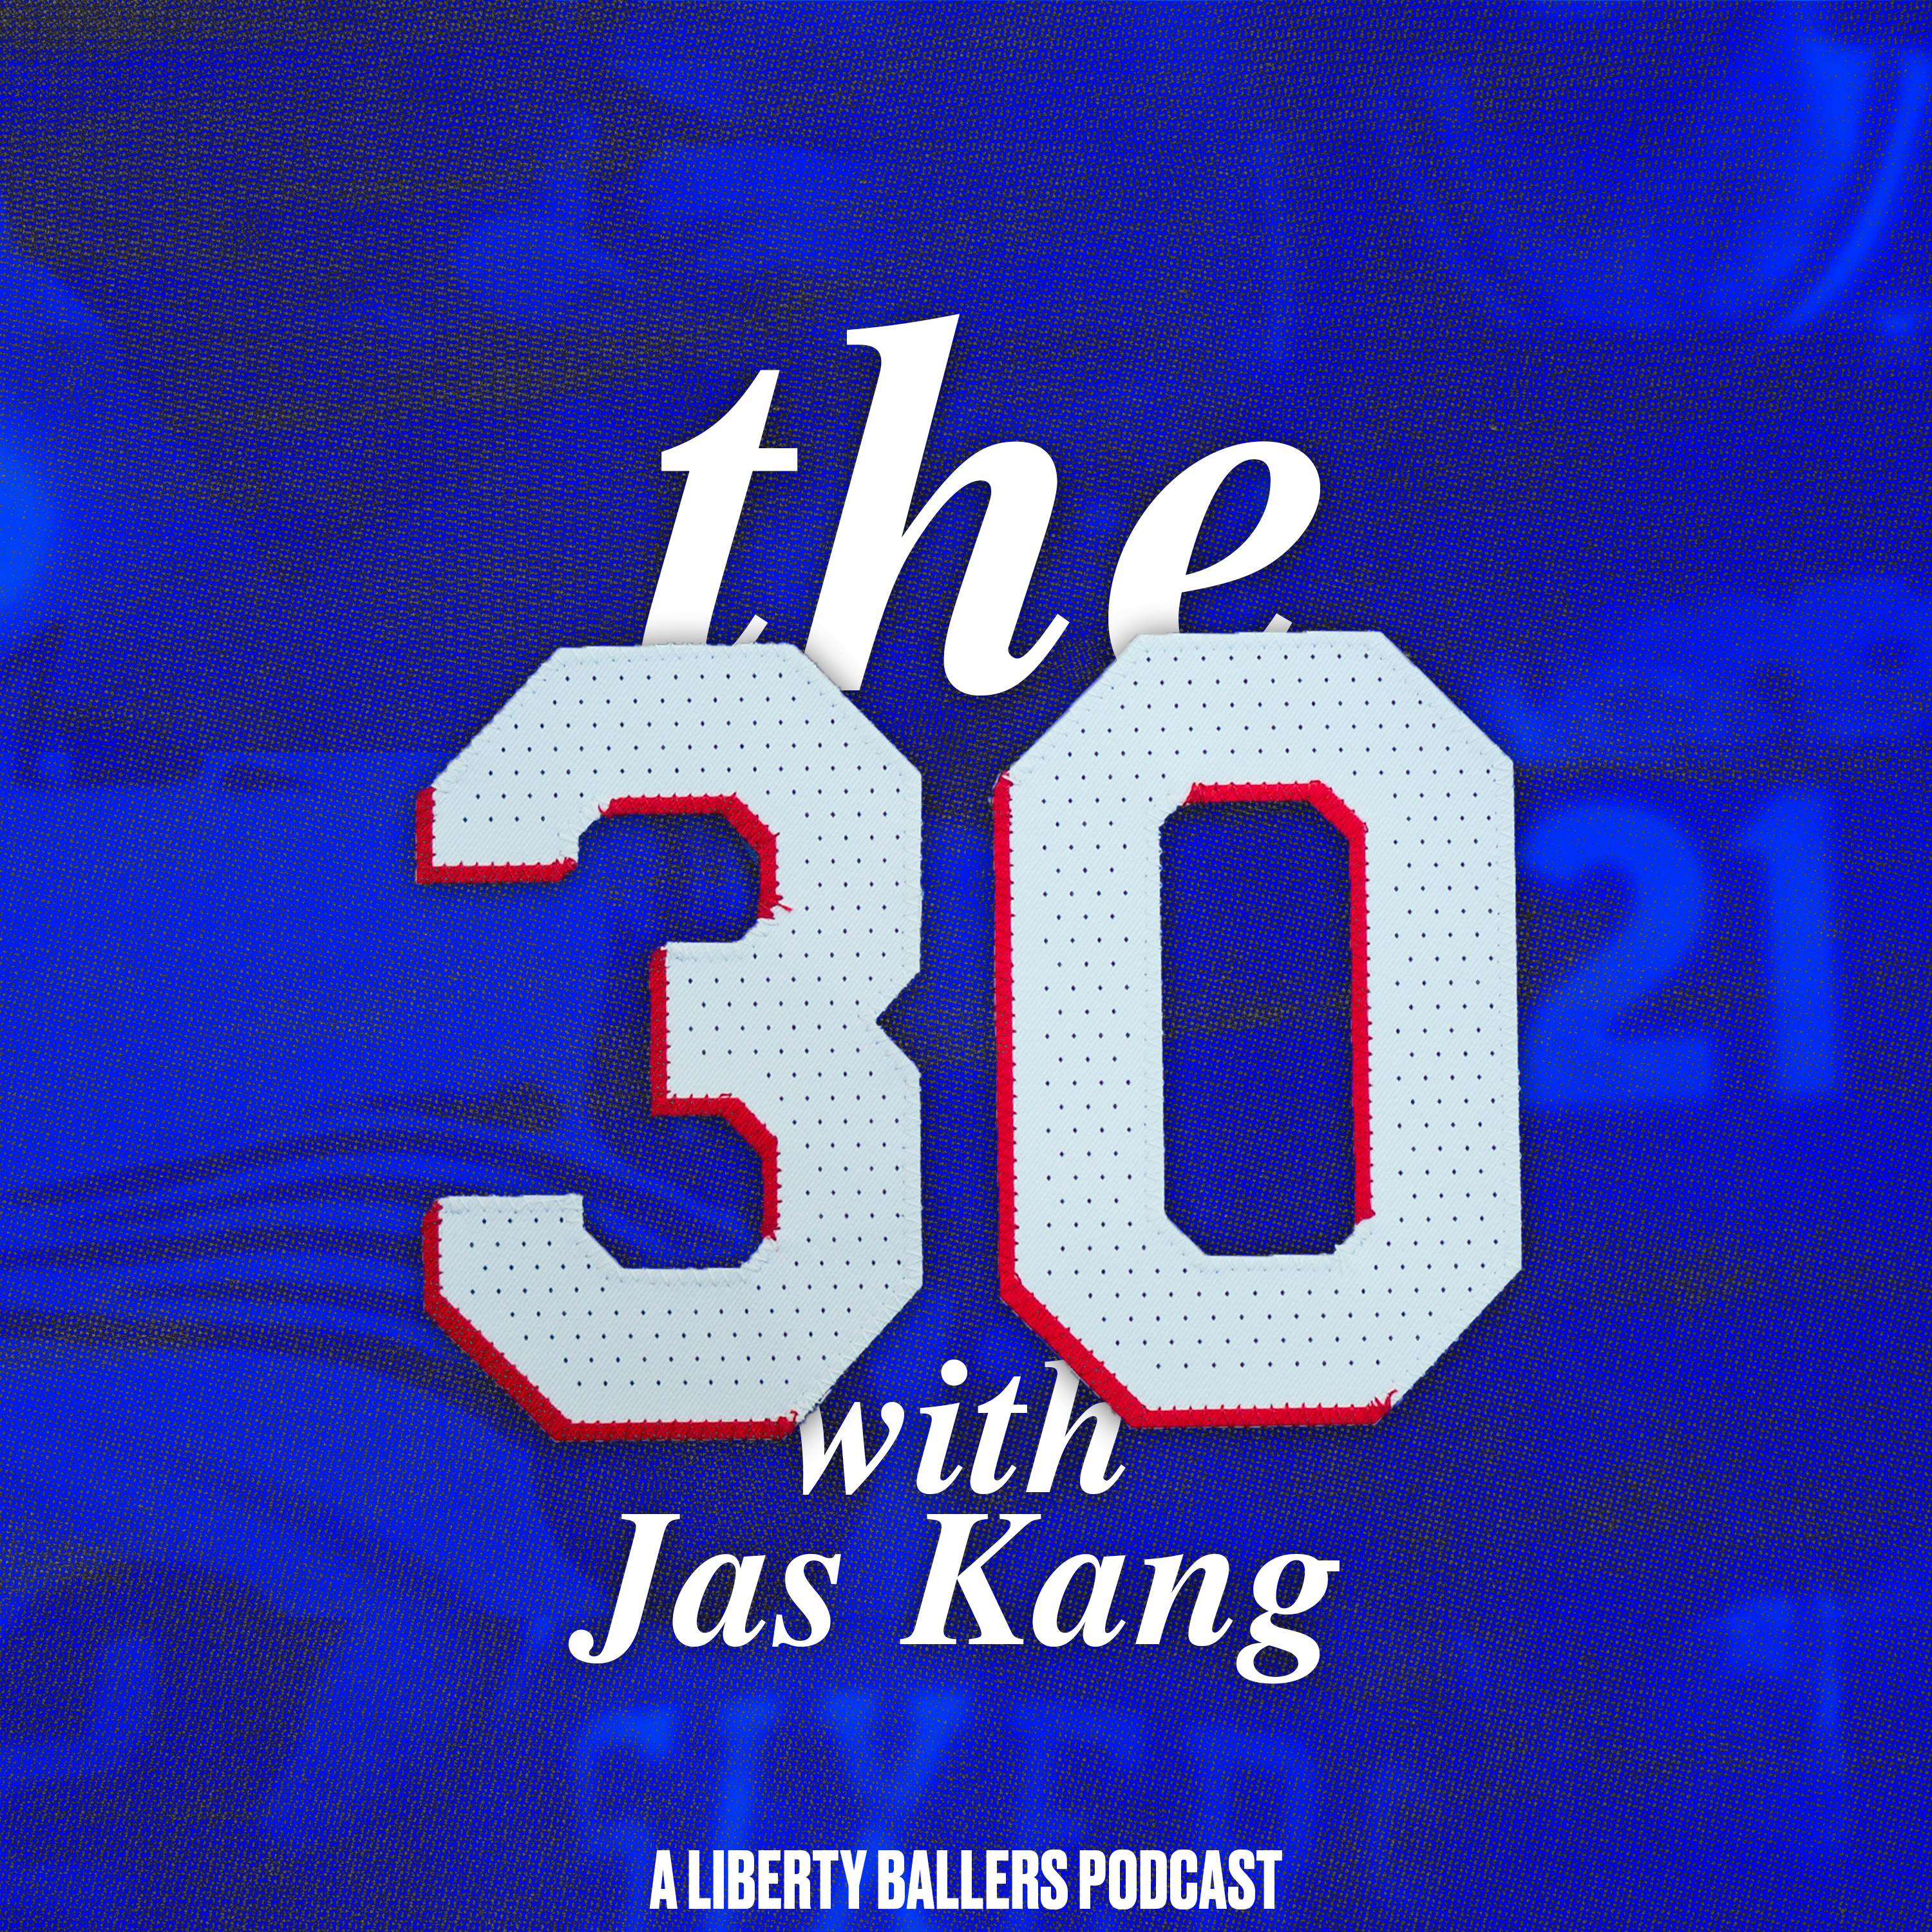 Shorthanded Sixers beat Ben Simmons and the Nets: The 30: With Jas Kang and Jackson Frank